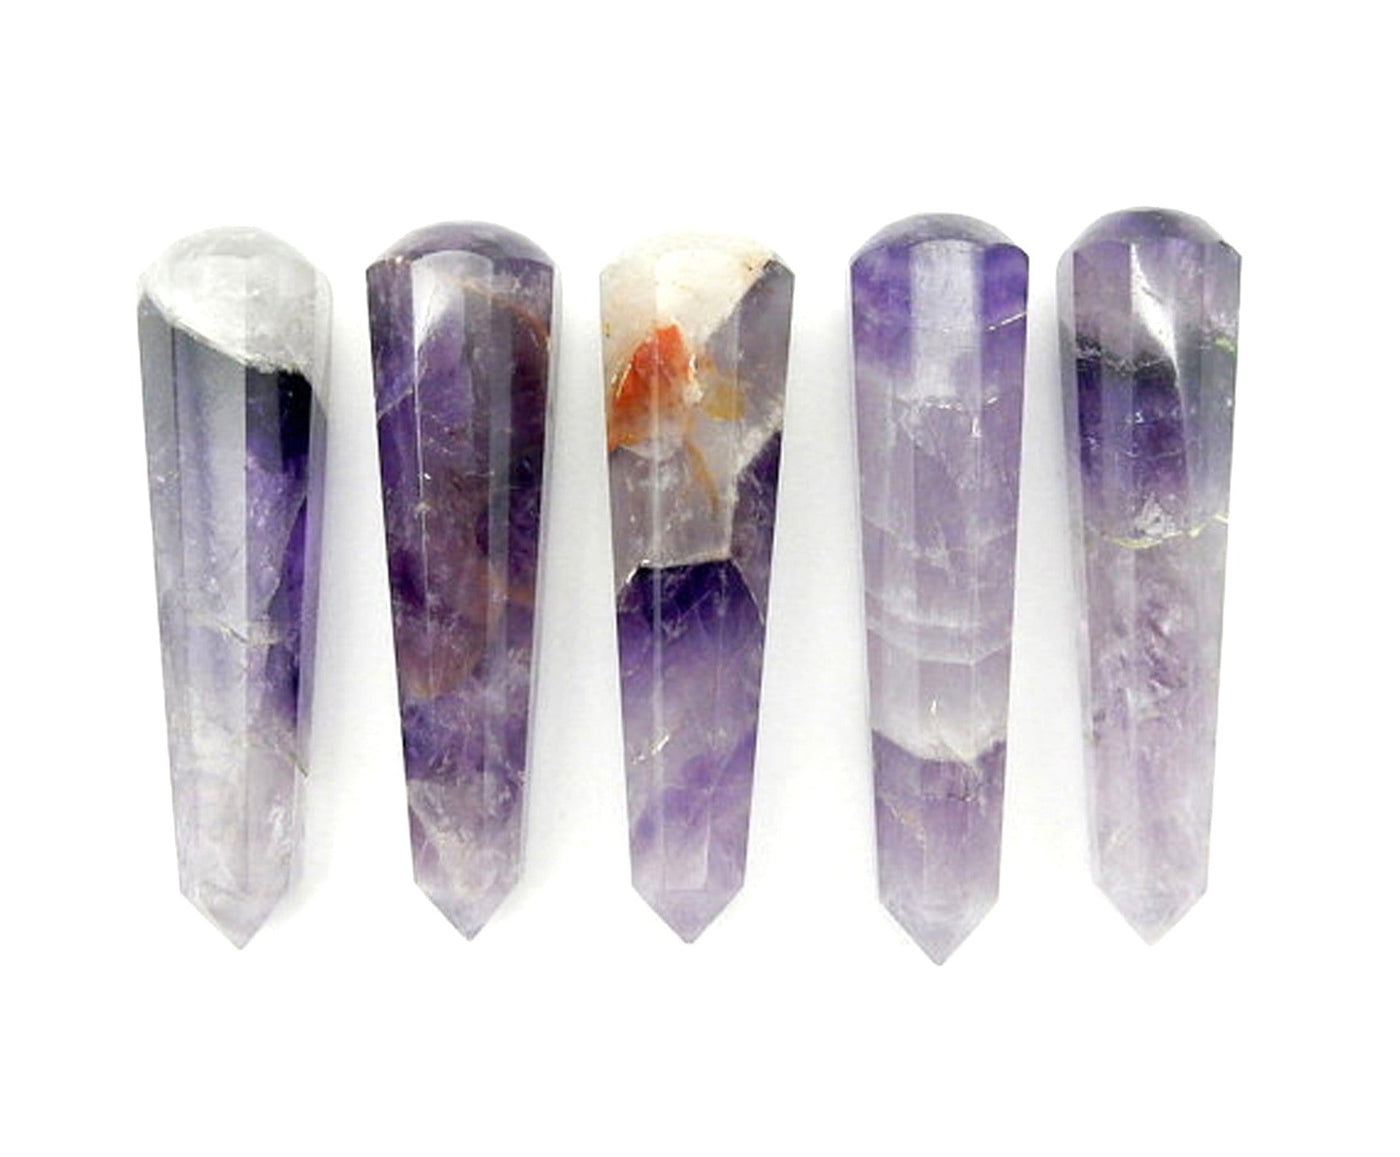 5 amethyst massage wands lined up on white background